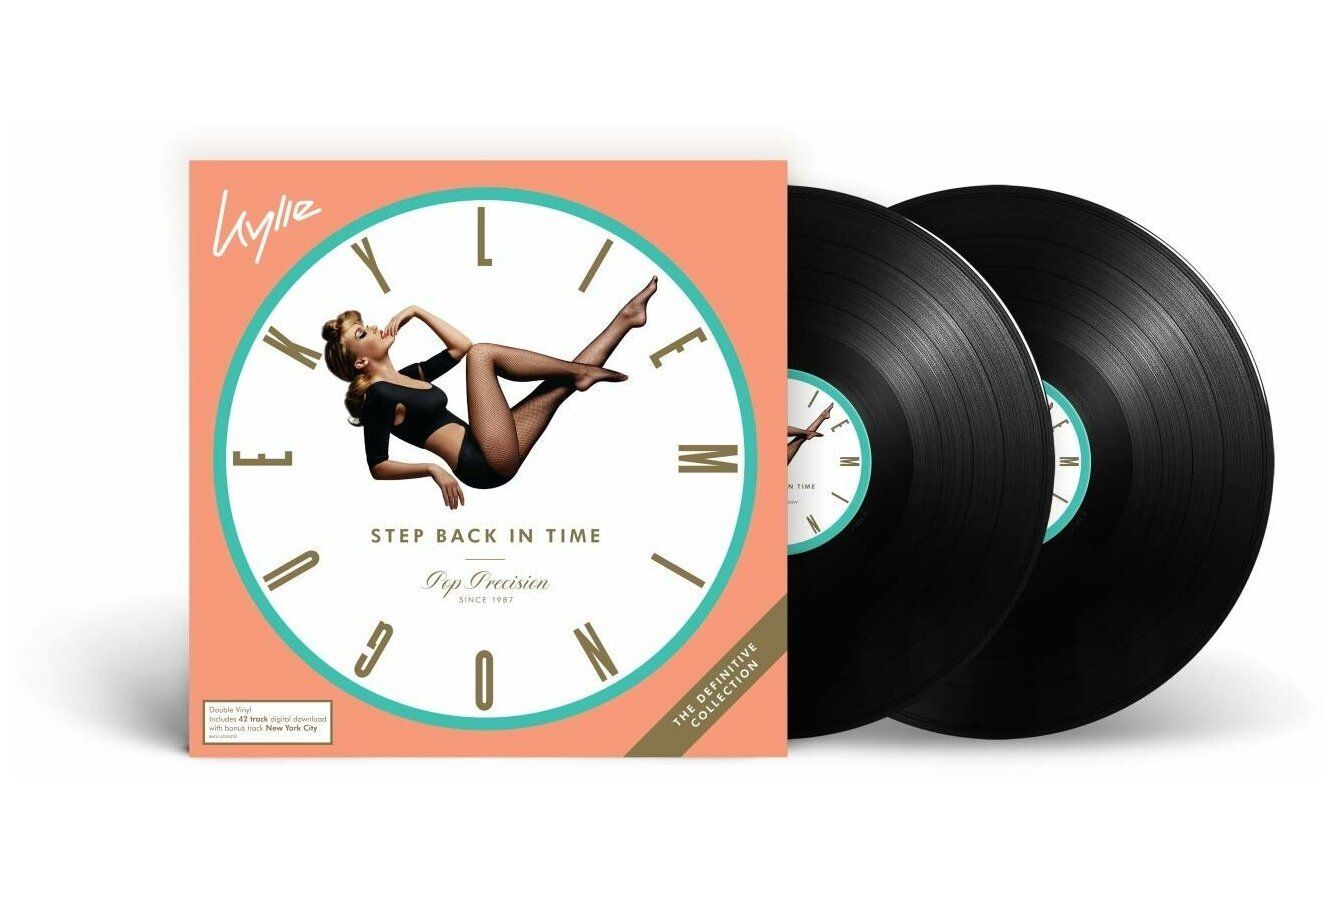 Виниловая Пластинка Minogue, Kylie Step Back In Time (The Definitive Collection) (4050538484212)